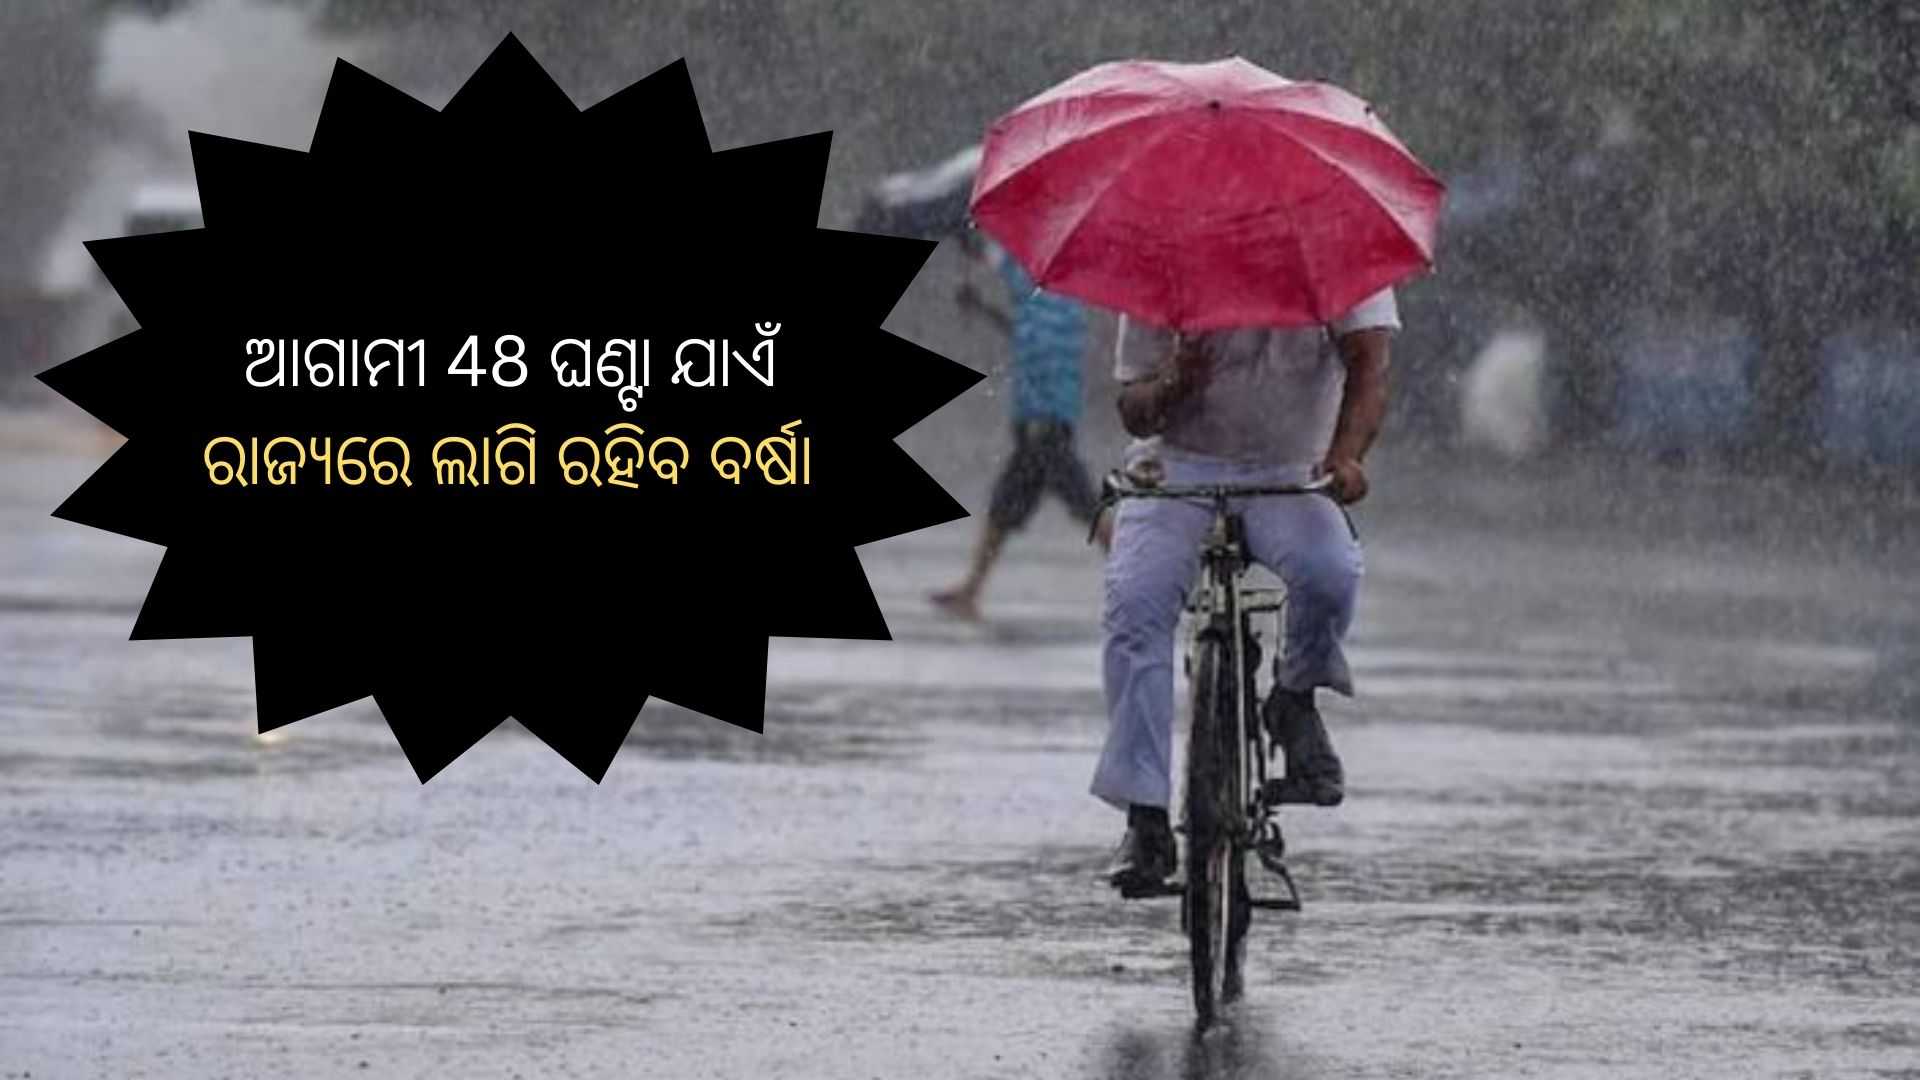 odisha weather update low pressure warning issued in 3 districts